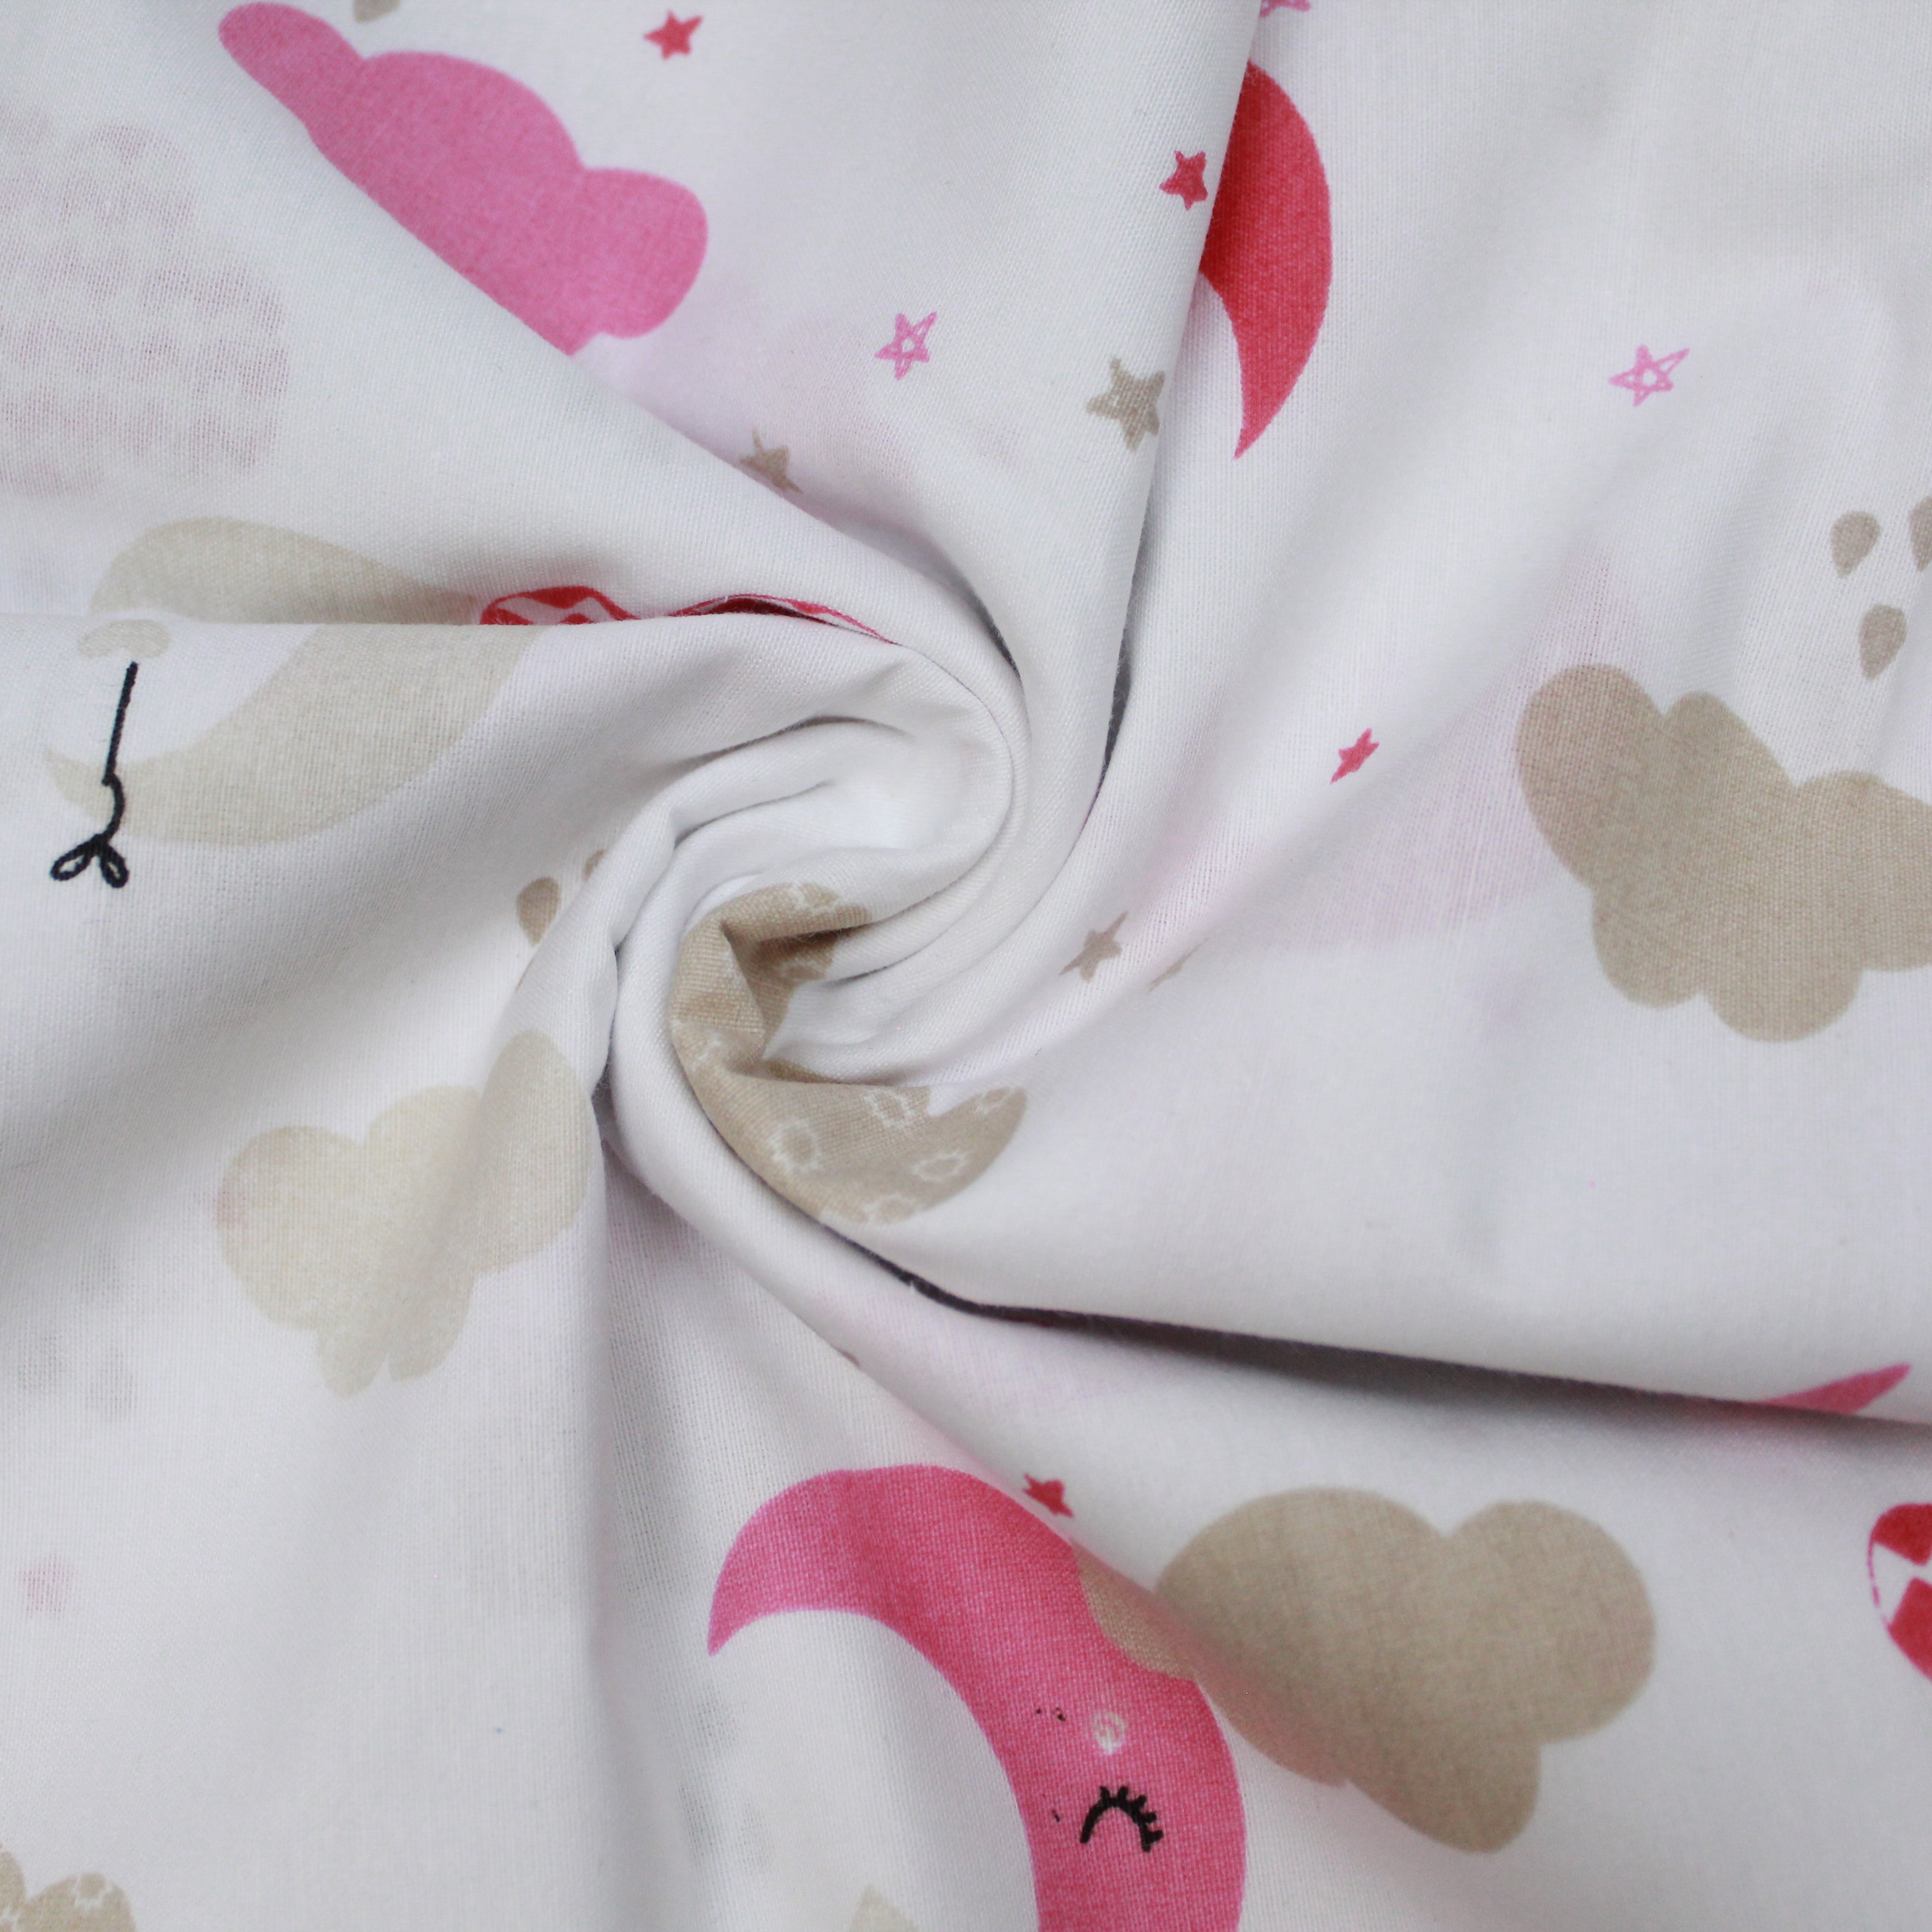 Premium Quality Super Wide Cotton Blend Sheeting "Cloud Moon" 94" Wide White & Pink